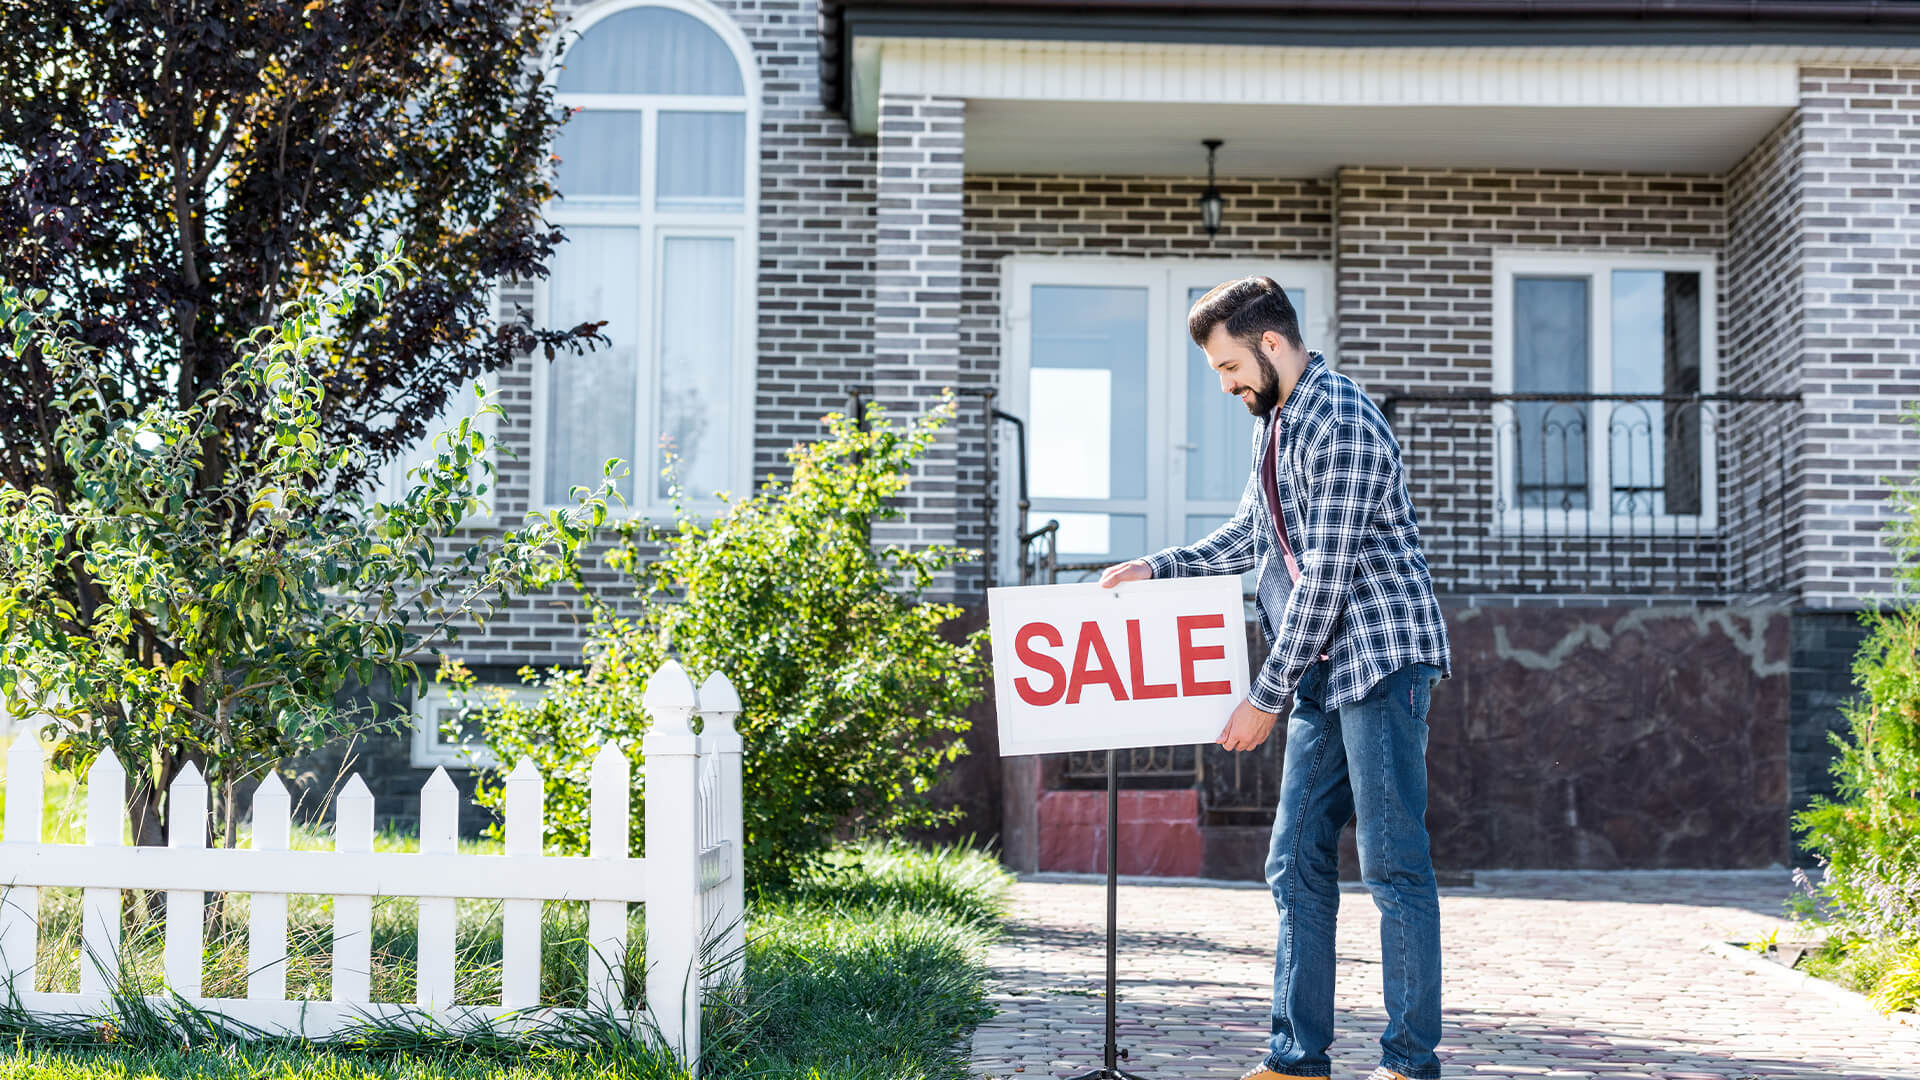 Selling to a Cash Buyer: Should You Spend Extra Money?